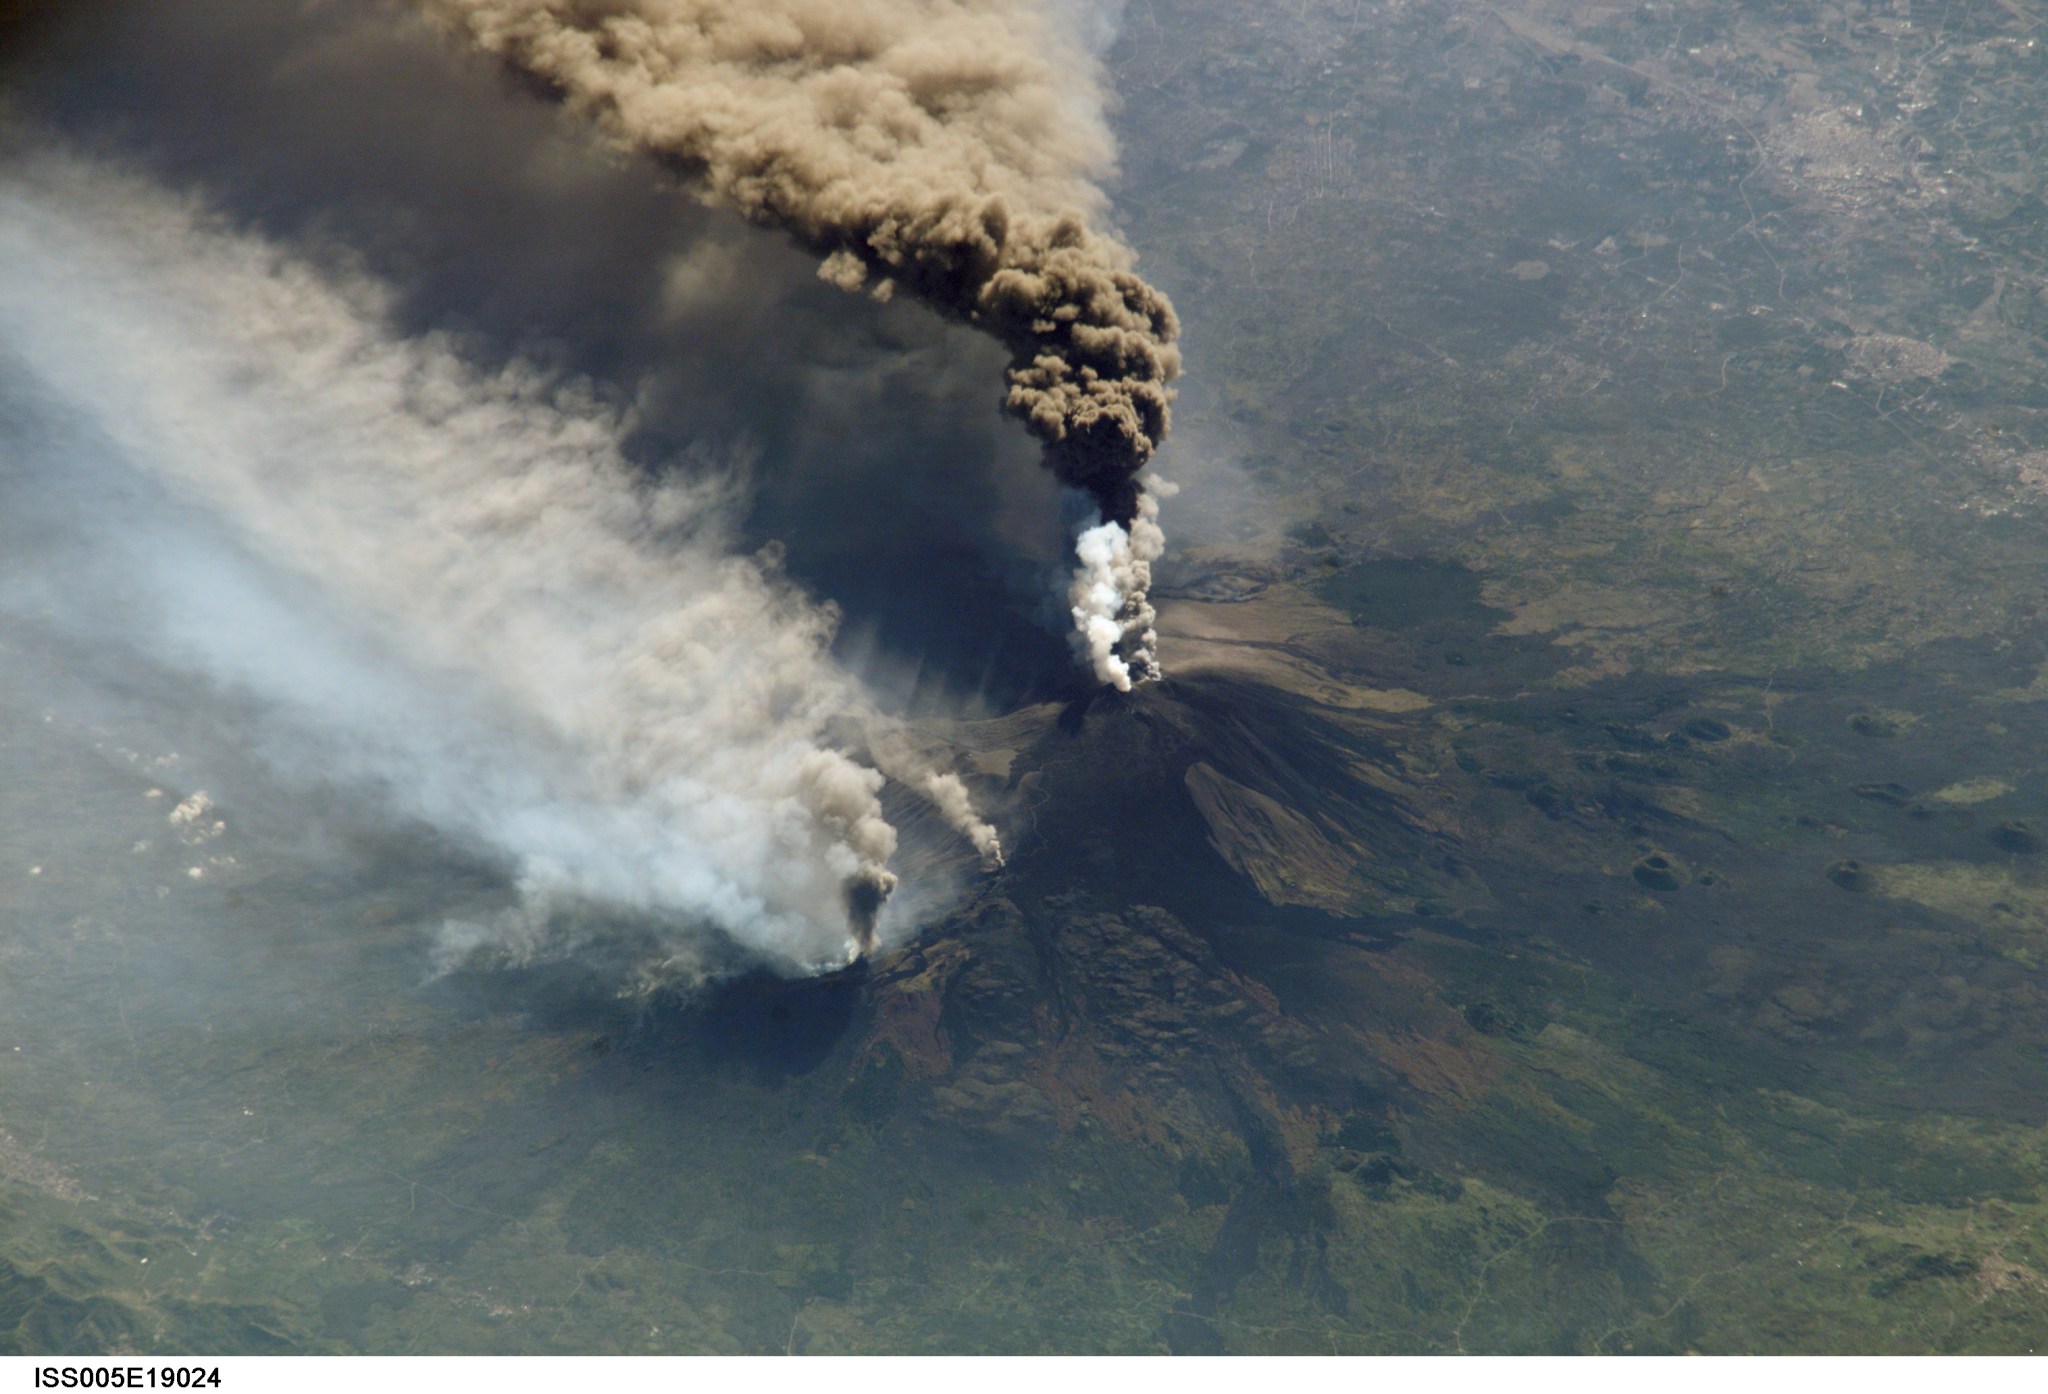 Can Volcanic Super Eruptions Lead to Major Cooling? Study Suggests No